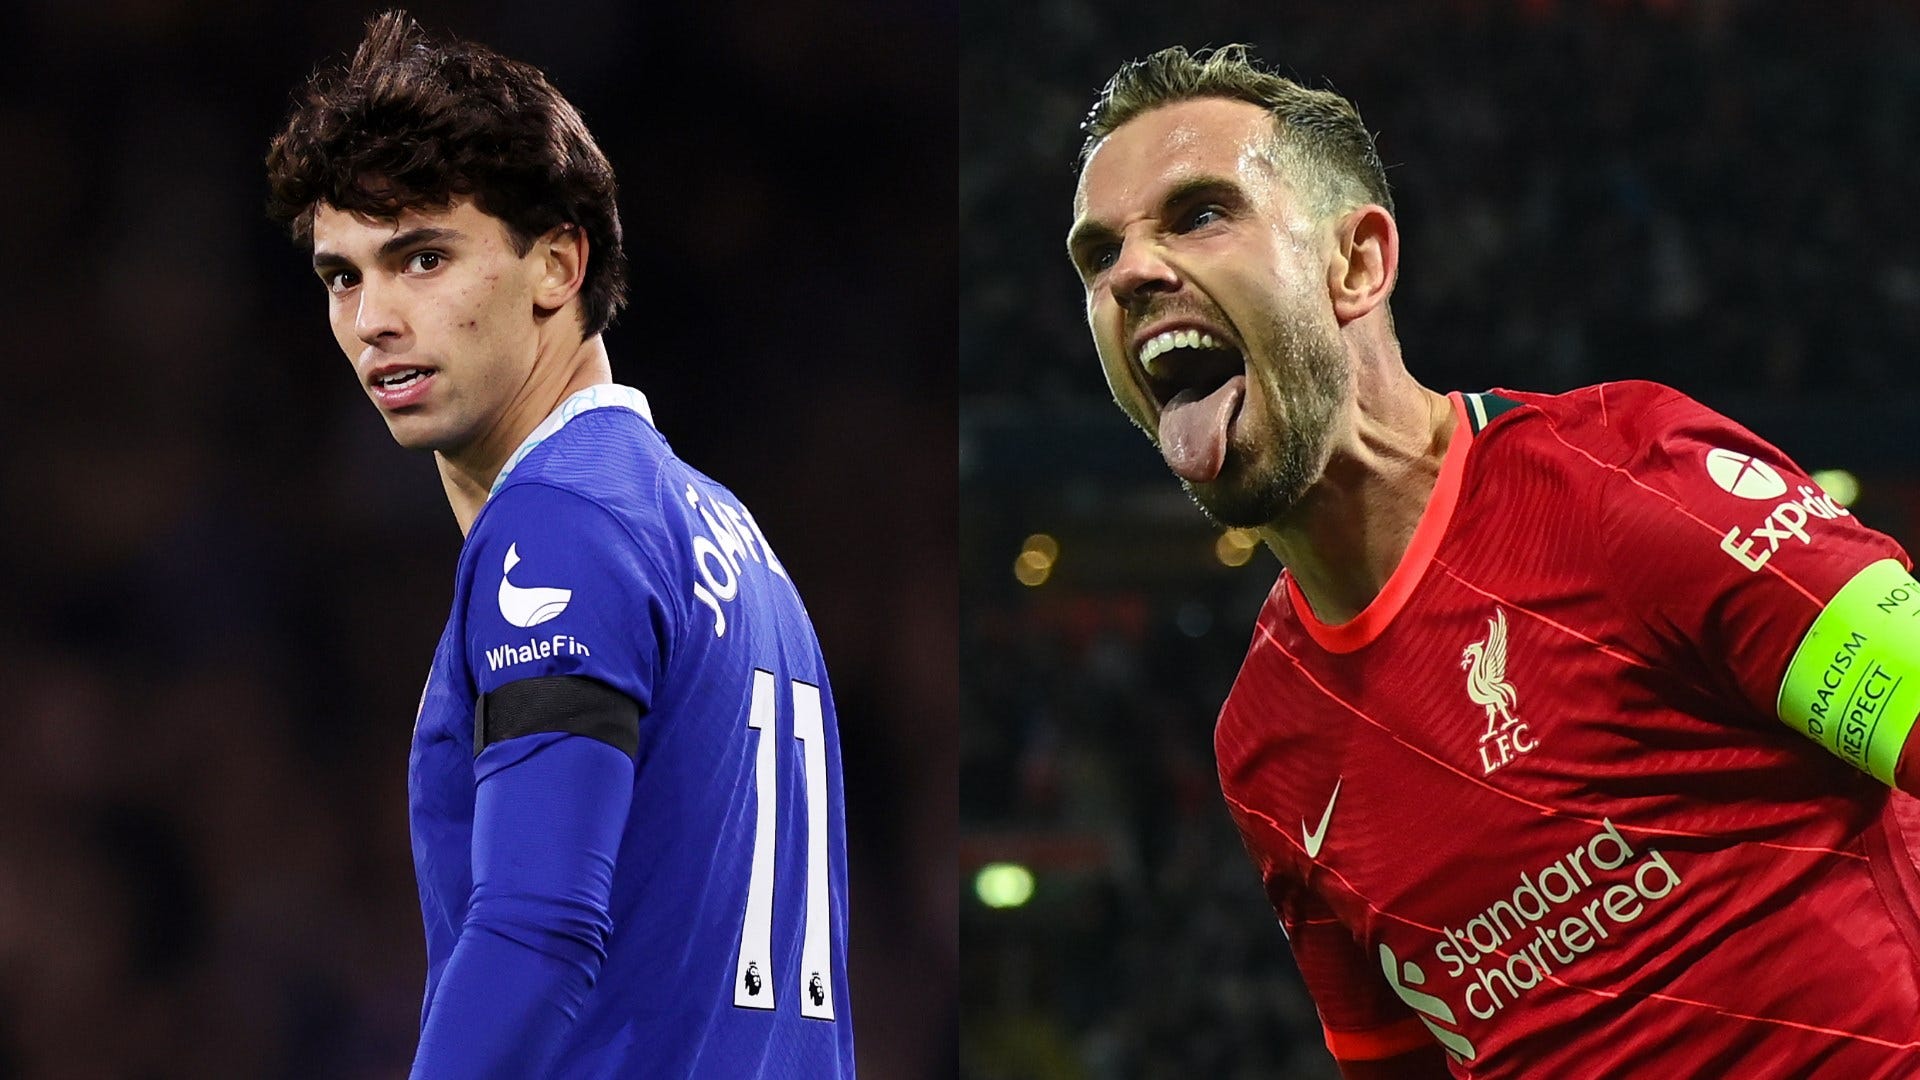 Chelsea vs Liverpool Where to watch the match online, live stream, TV channels and kick-off time Goal